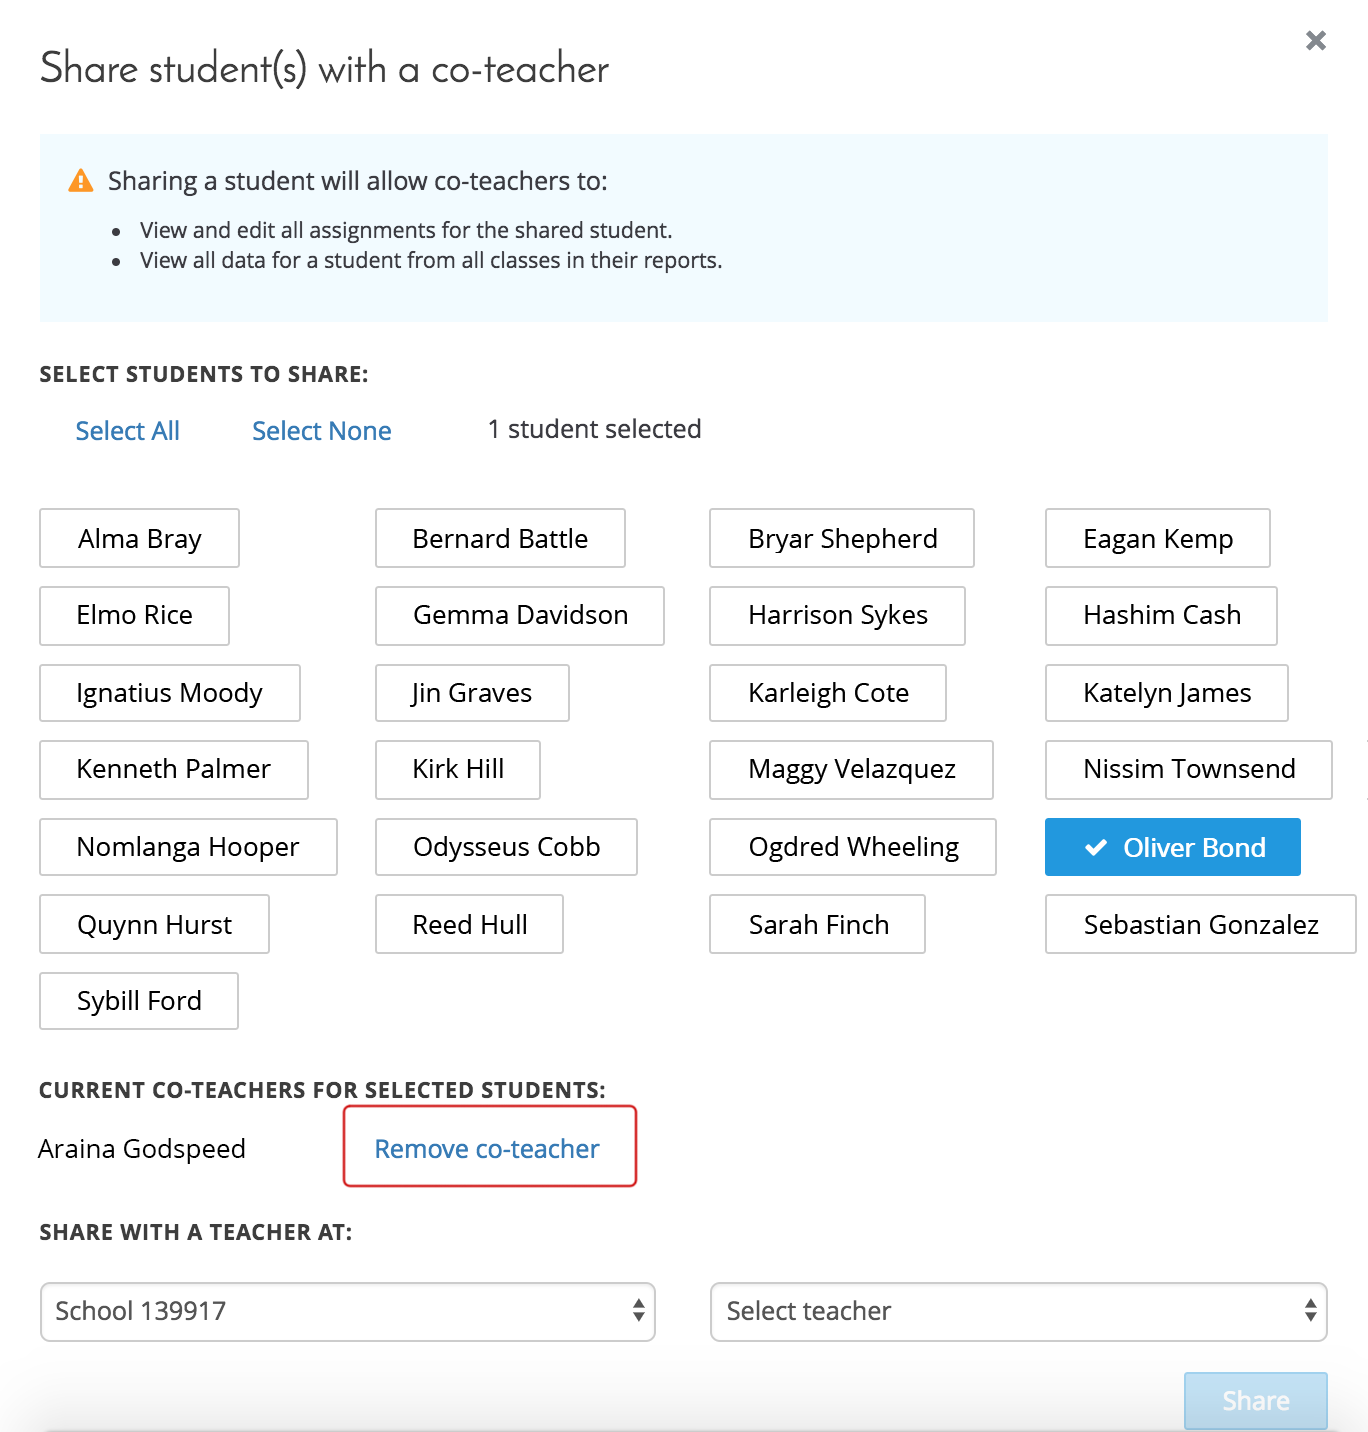 The selected student is shared with another teacher (a co-teacher). Use the 'Remove co-teacher' link to the right of the teacher's name to stop sharing the student with that teacher.